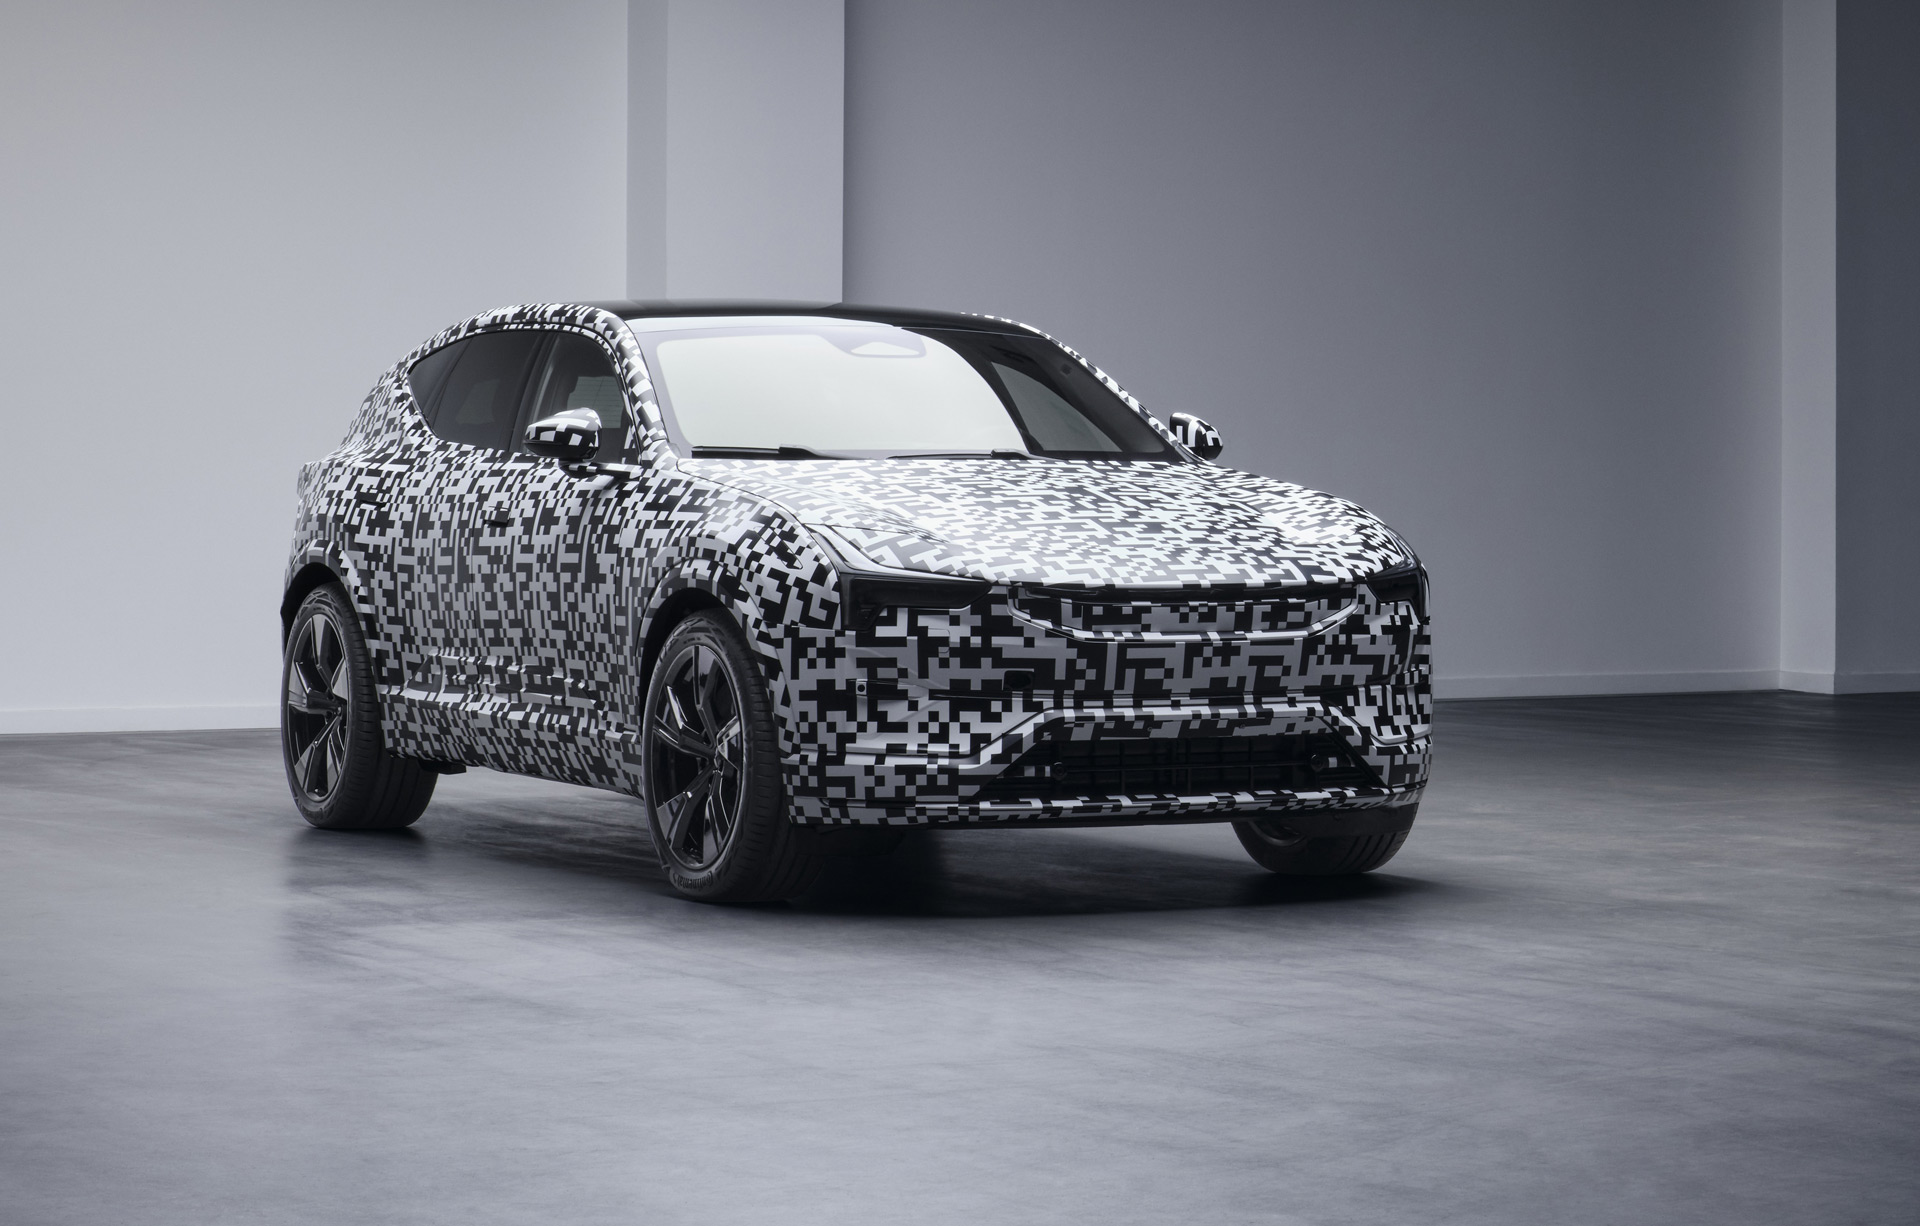 Polestar developing its own electric motors, batteries, electrical architecturePolestar developing its own electric motors, batteries, electrical architecture